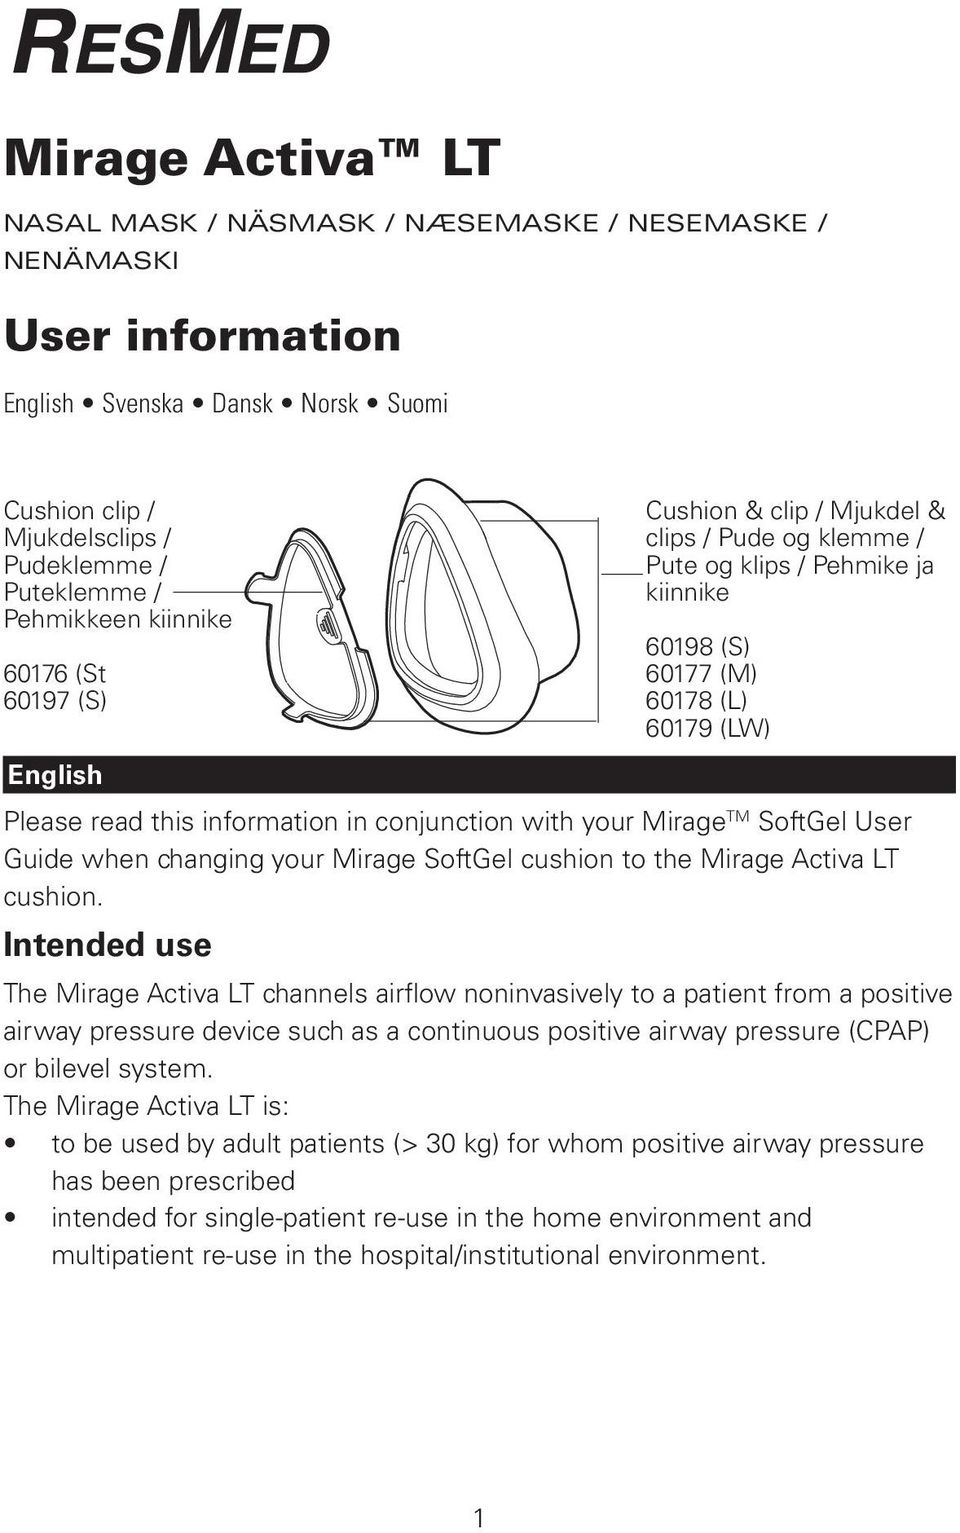 conjunction with your Mirage TM SoftGel User Guide when changing your Mirage SoftGel cushion to the Mirage Activa LT cushion.